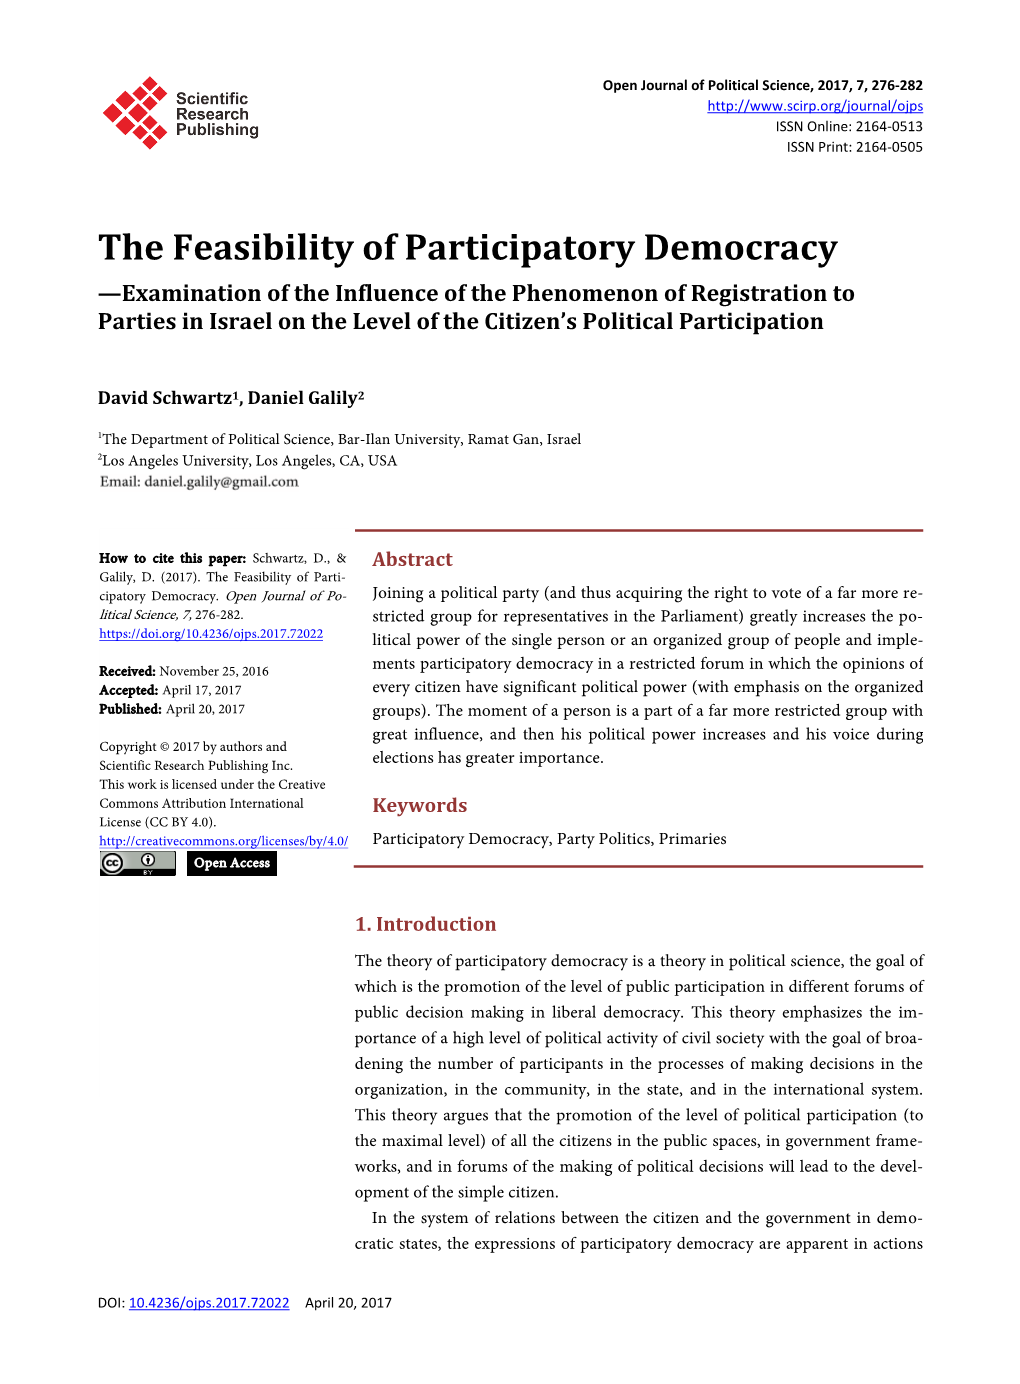 The Feasibility of Participatory Democracy